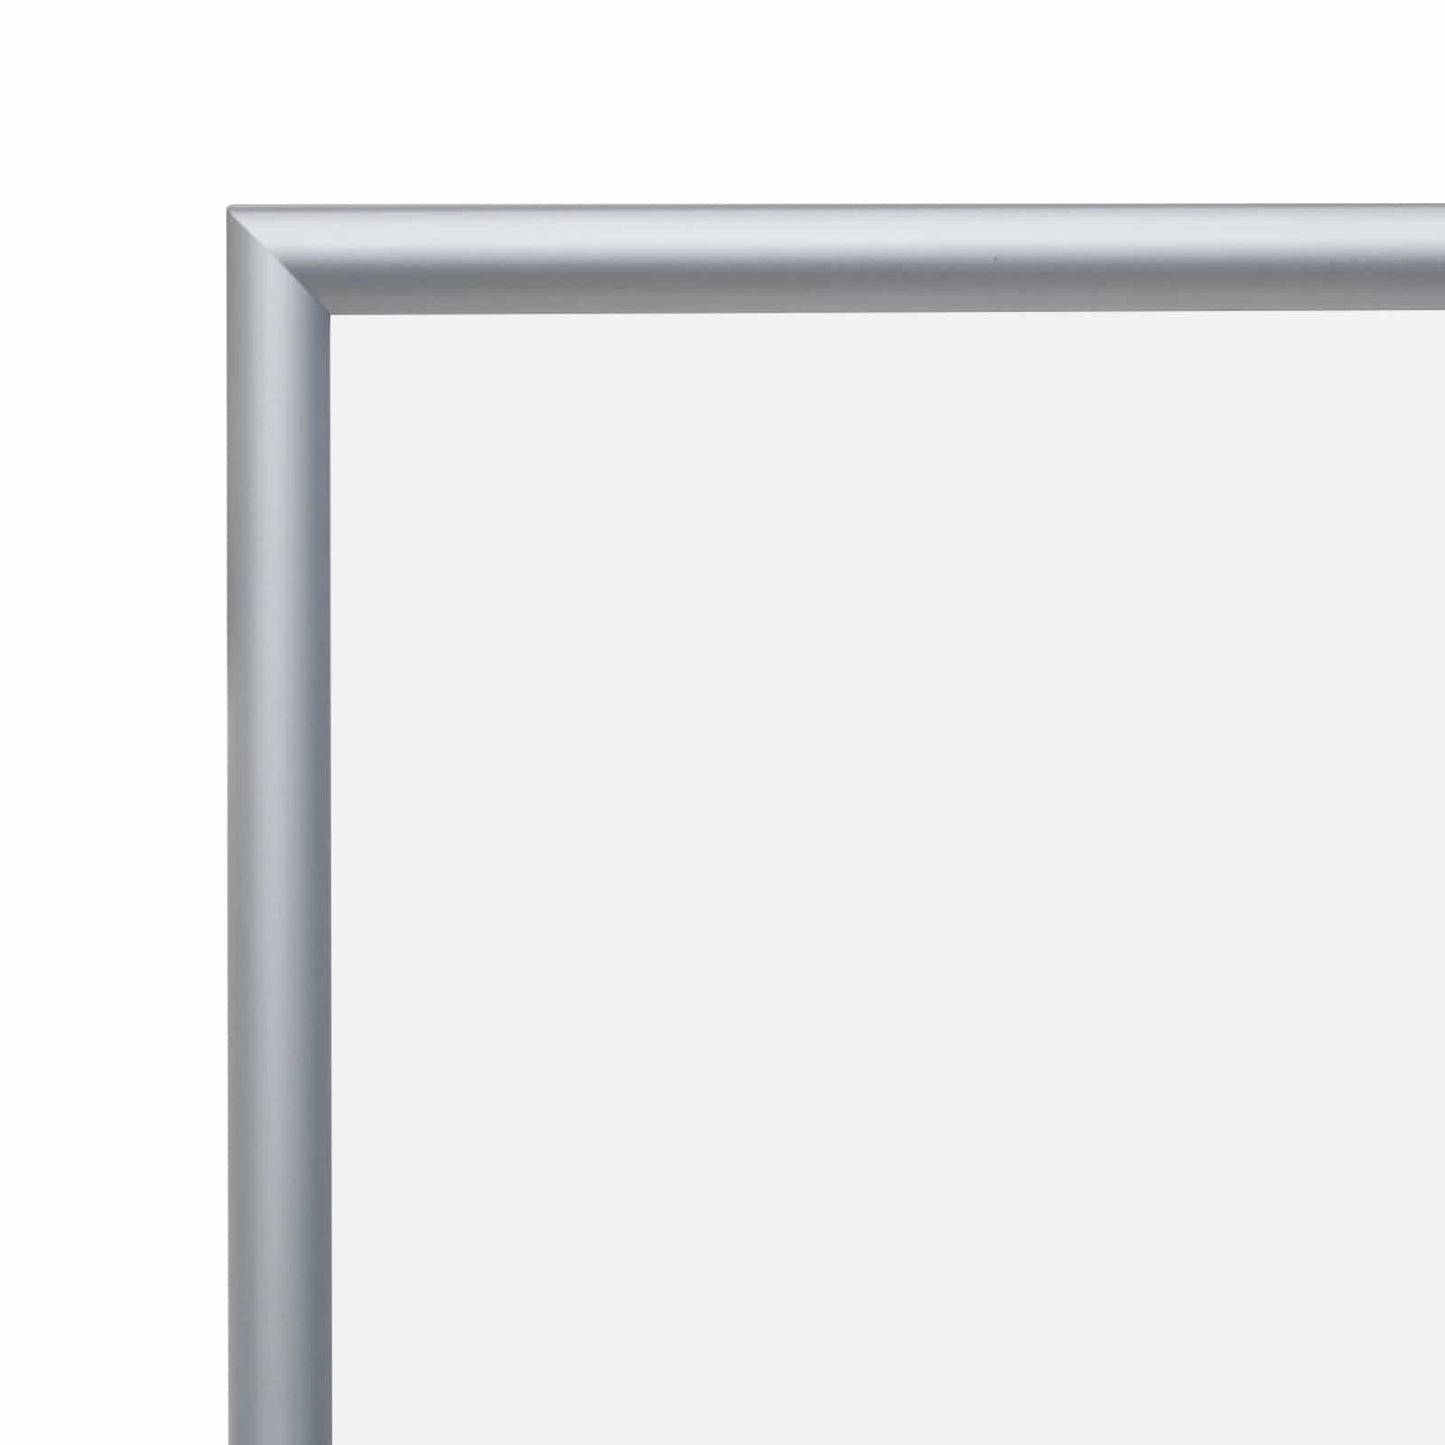 27x40 Silver Snap Frame - 1.2" Profile - Snap Frames Direct